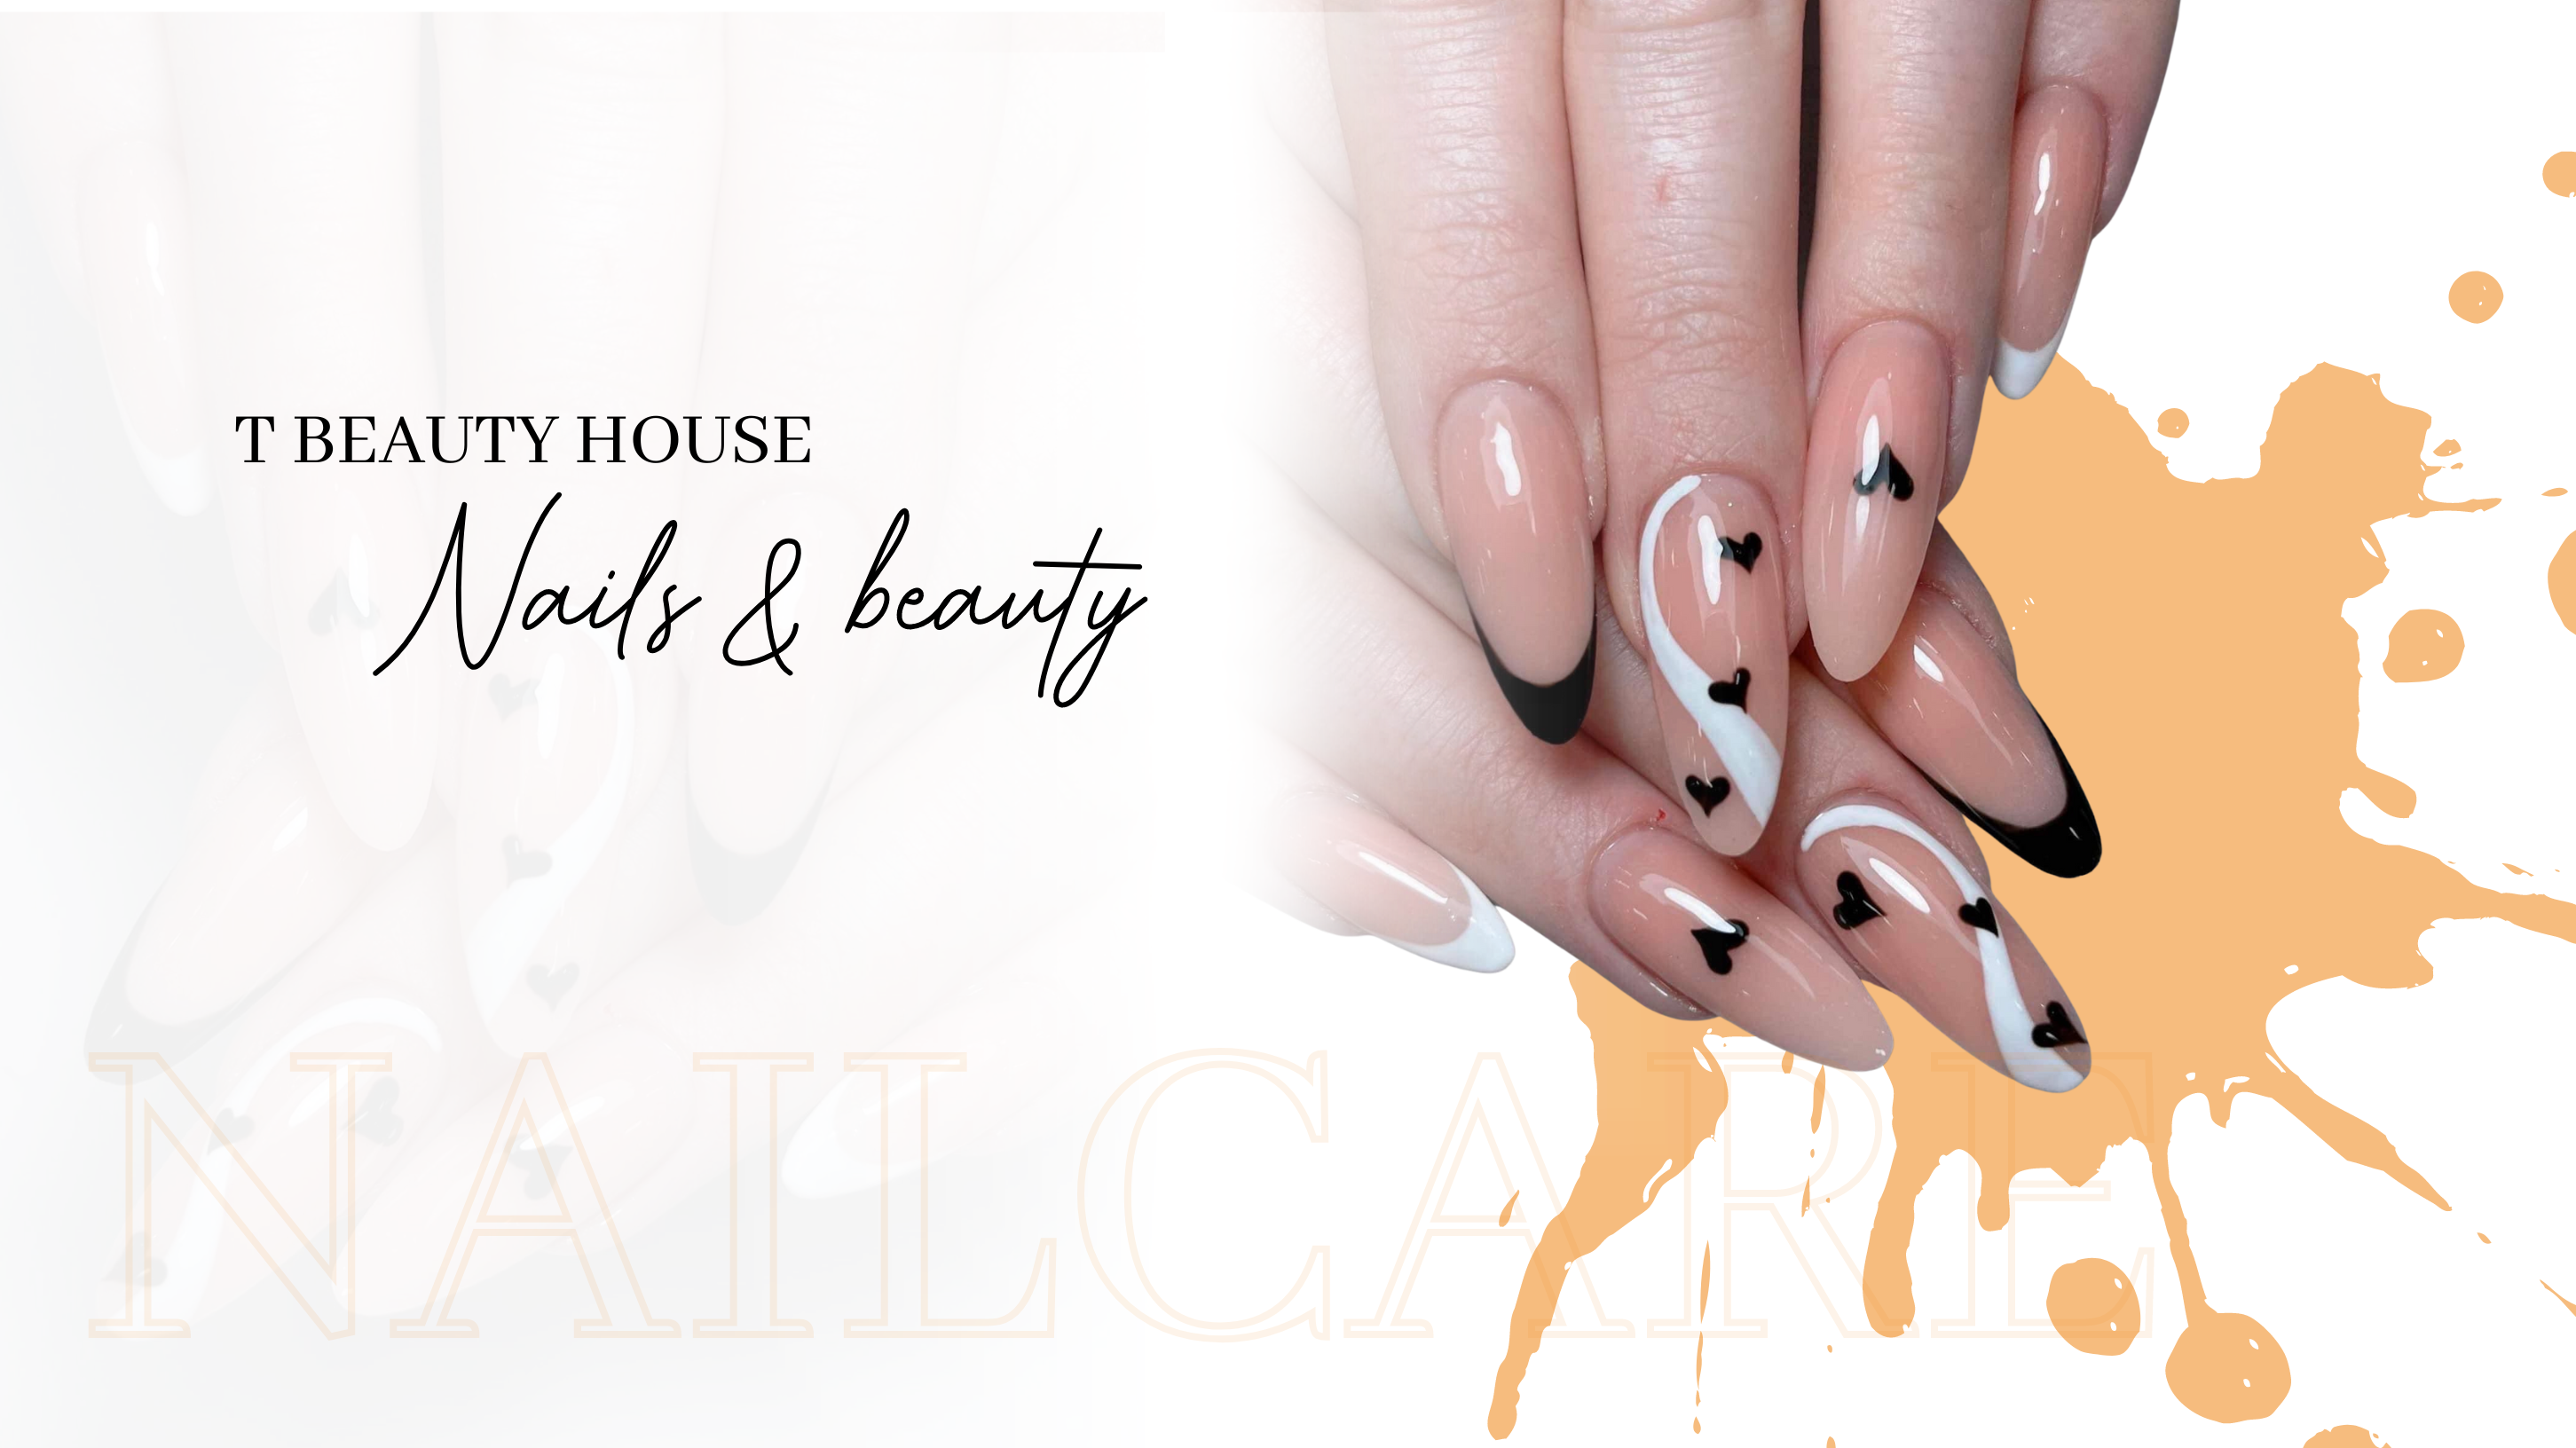 HOUSE OF NAIL SPA I: Read Reviews and Book Classes on ClassPass